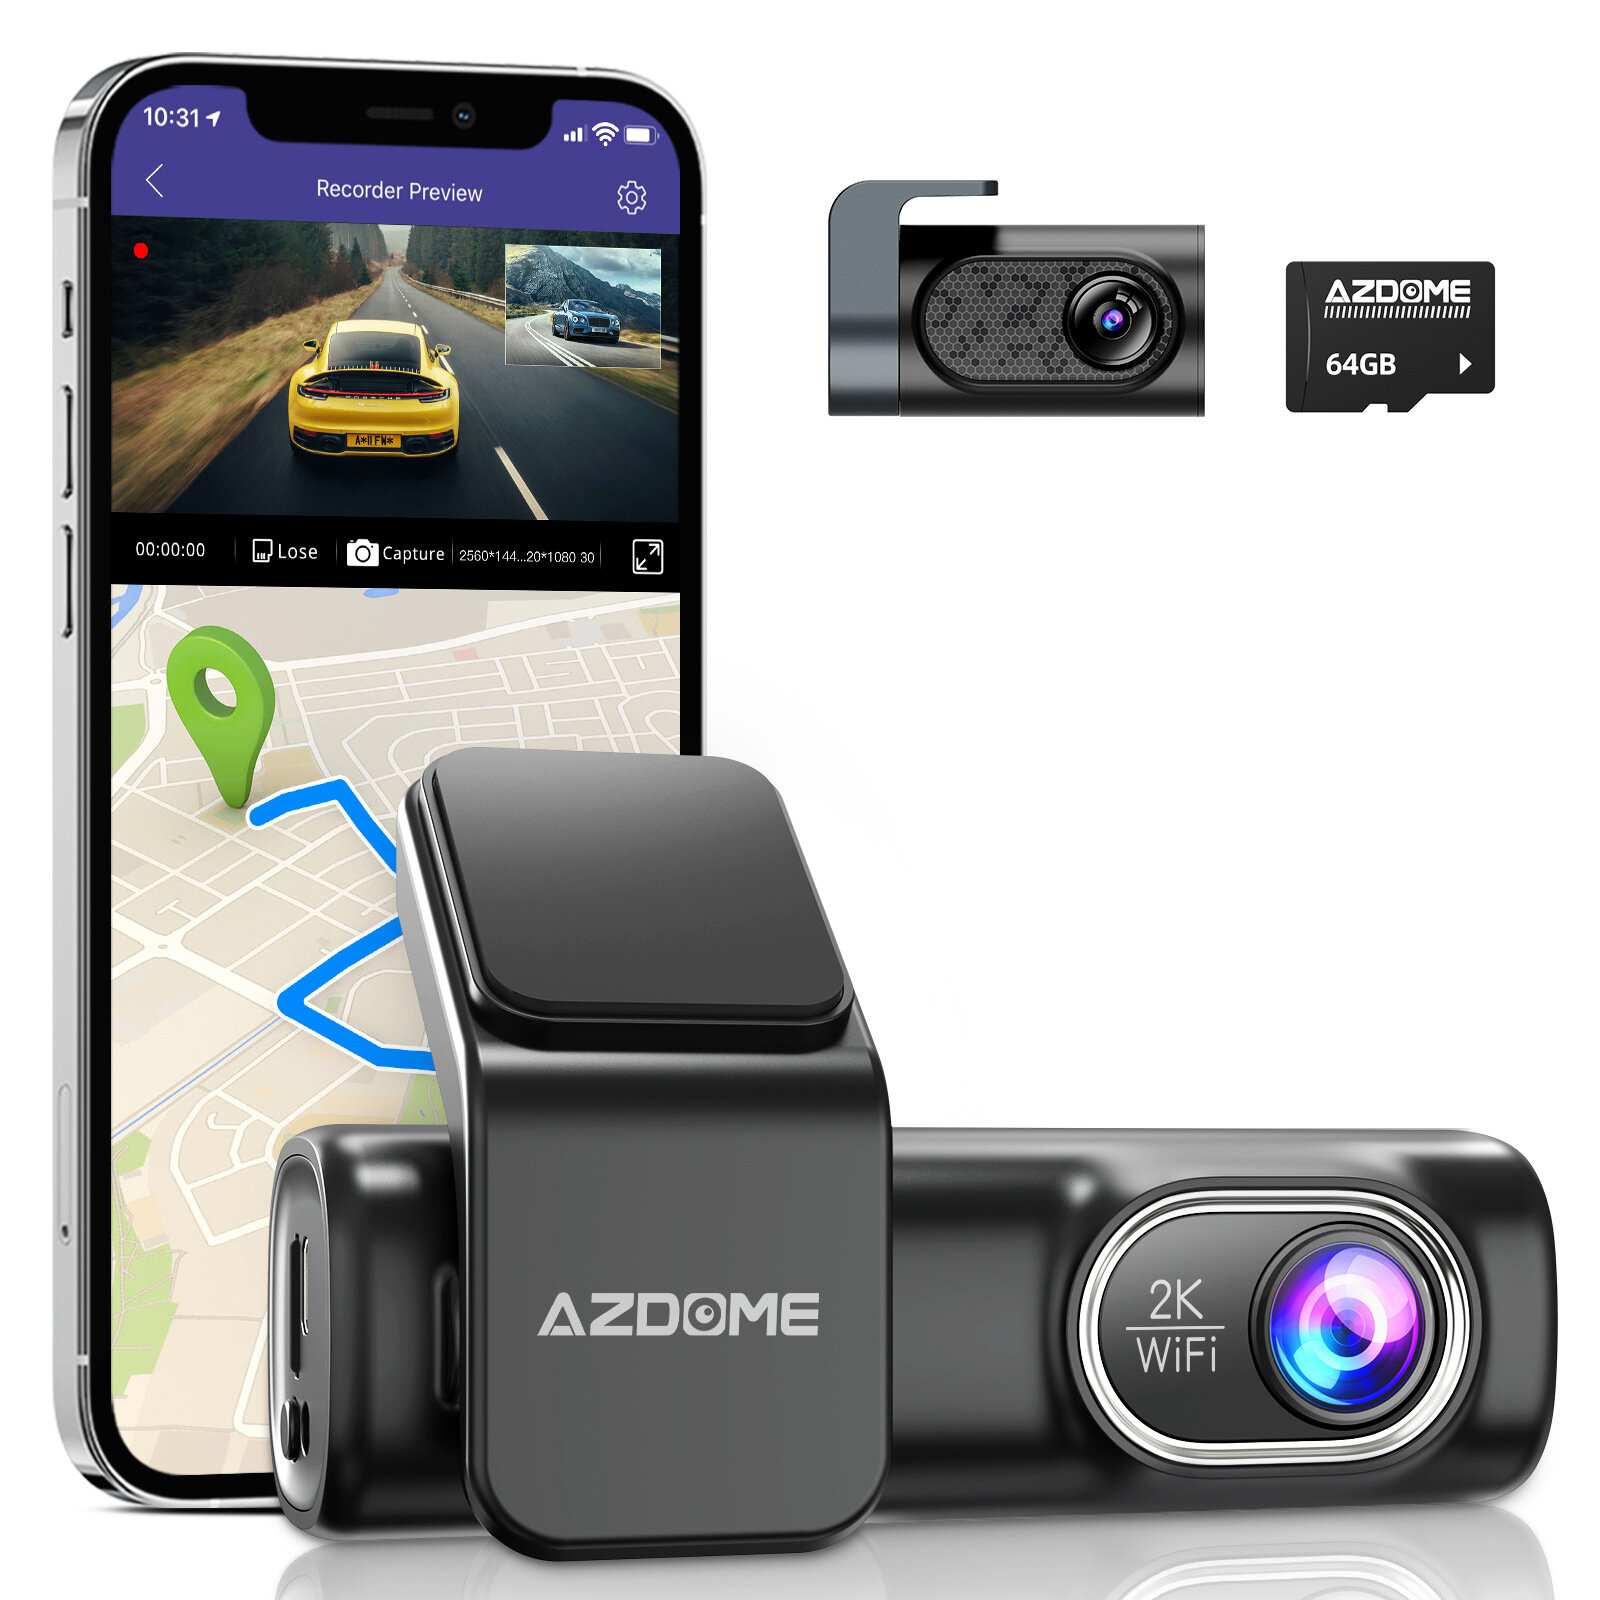 

AZDOME M301 Ultra HD WiFi Dash Cam2K+720P 2 Channel Dual Dash Cam With WiFi GPS Smart Voice Control Front & Rear Dual